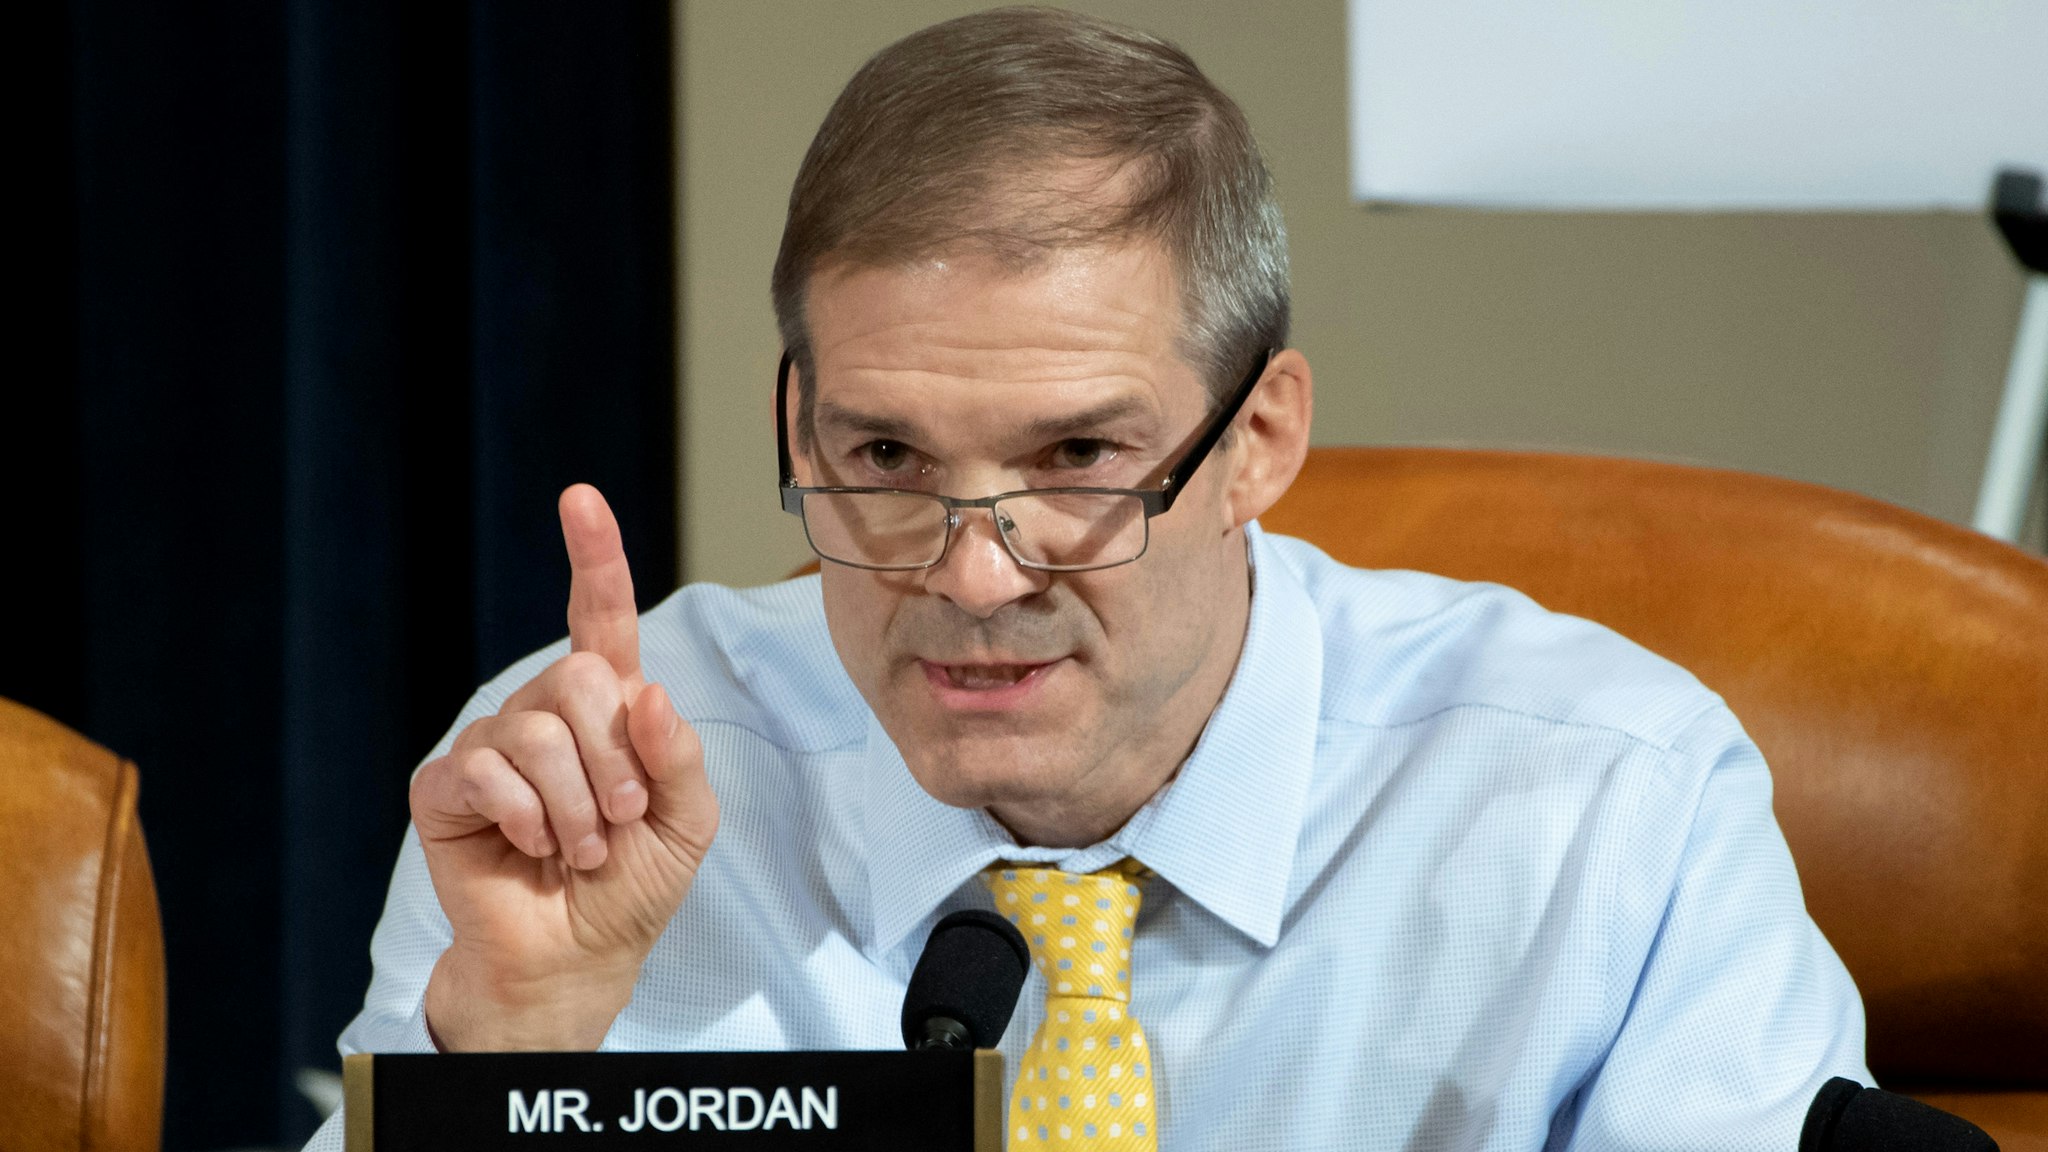 WASHINGTON, DC - NOVEMBER 13: Rep. Jim Jordan (R-OH) questions top U.S. diplomat in Ukraine William B. Taylor Jr. during the first public hearings held by the House Permanent Select Committee on Intelligence as part of the impeachment inquiry into U.S. President Donald Trump on Capitol Hill November 13, 2019 in Washington, DC. In the first public impeachment hearings in more than two decades, House Democrats are trying to build a case that President Donald Trump committed extortion, bribery or coercion by trying to enlist Ukraine to investigate his political rival in exchange for military aide and a White House meeting that Ukraine President Volodymyr Zelensky sought with Trump.